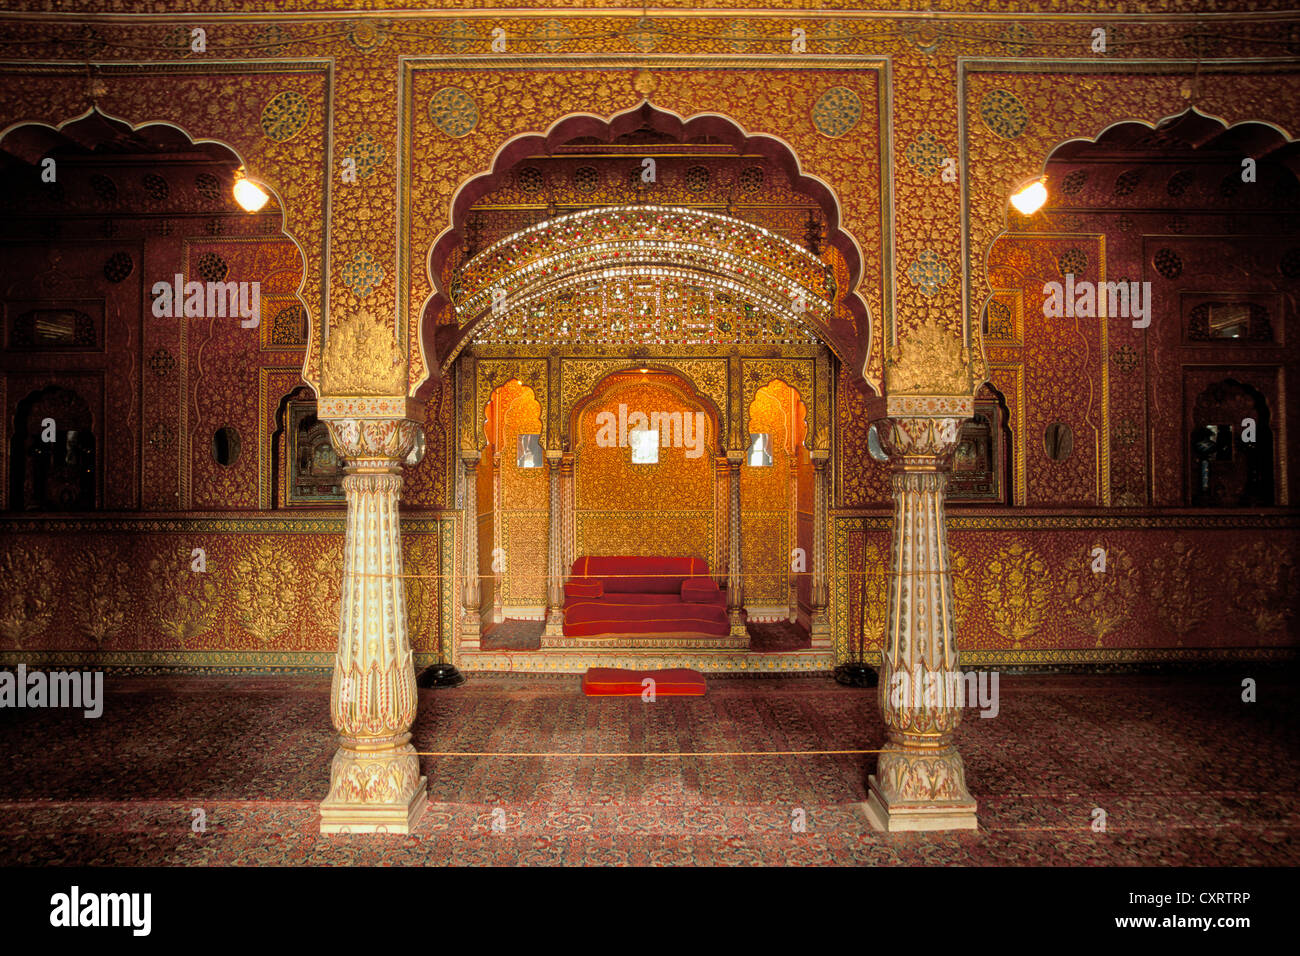 Seat in a niche, private audience hall, Anup Mahal, at Junagarh Fort, City Palace, Bikaner, Rajasthan, North India, India Stock Photo